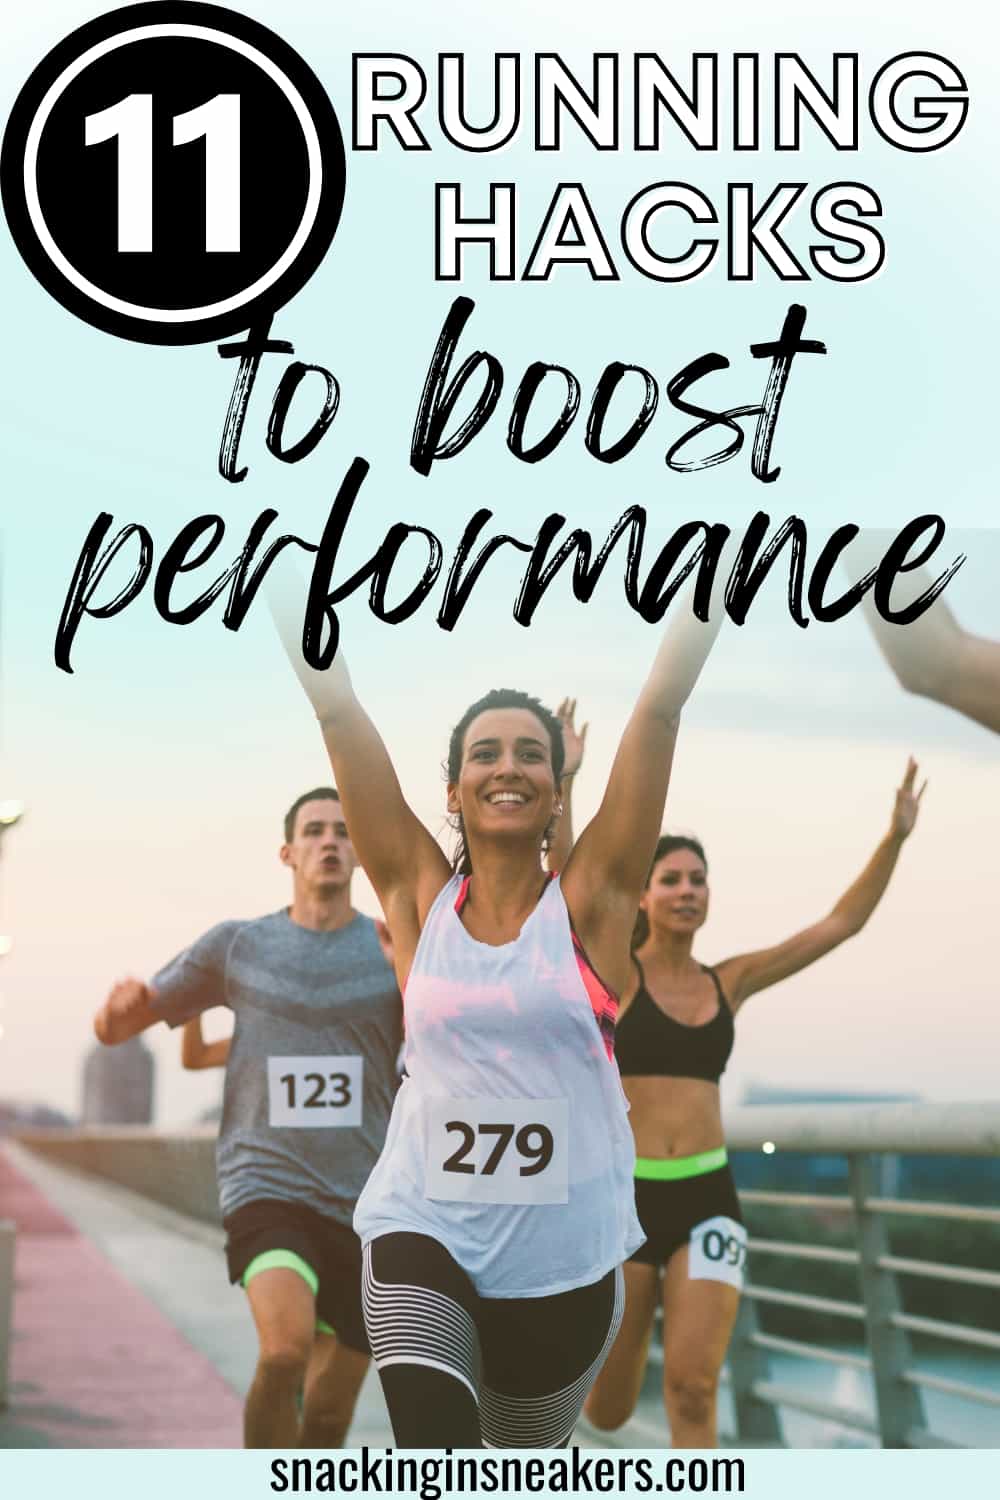 A woman finishing a road race with her hands in the air with a text overlay that says 11 running hacks to boost performance.